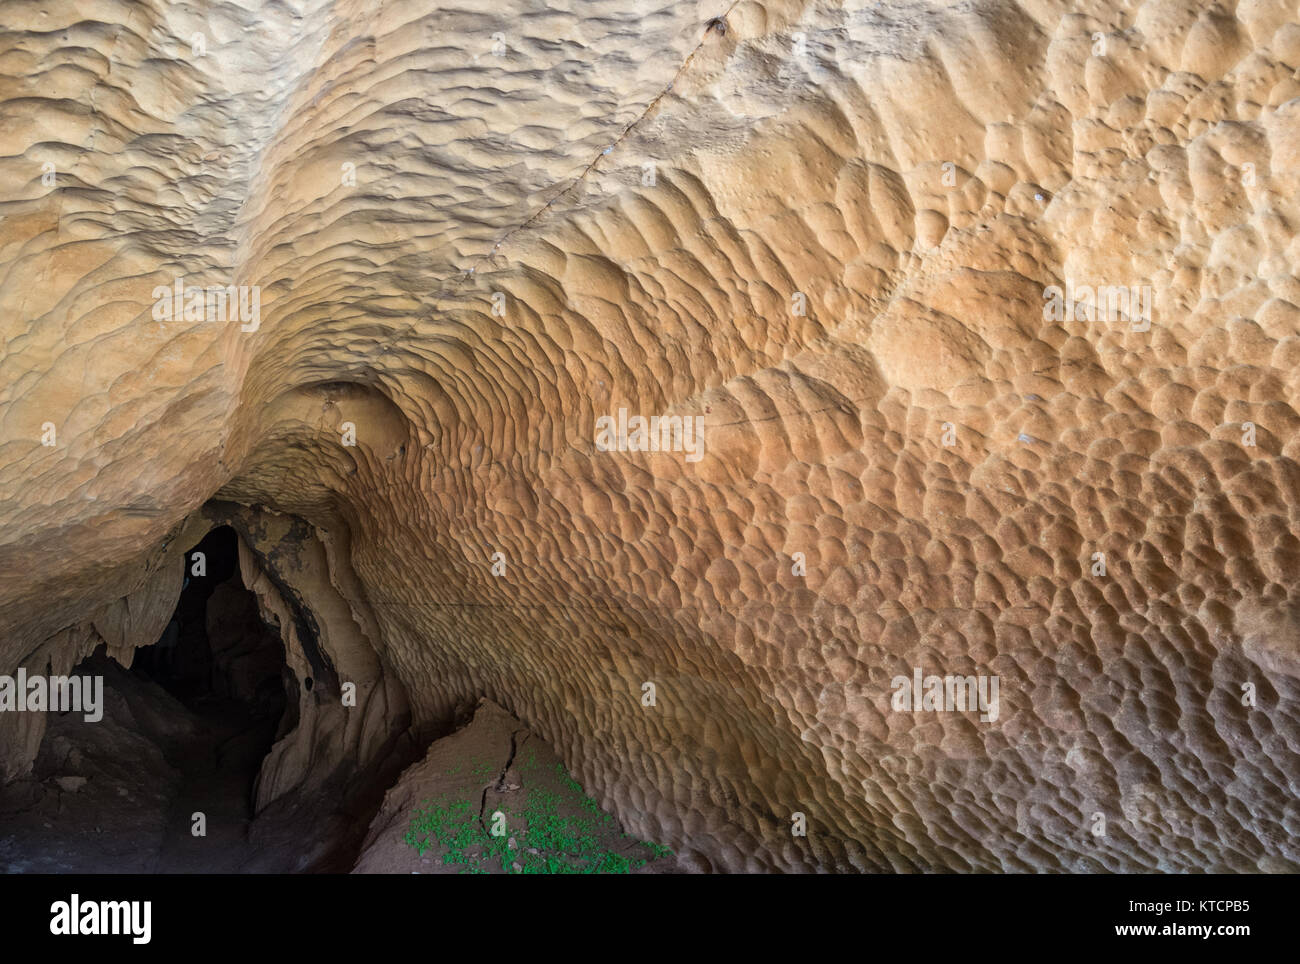 Detailed dissolution texture on the limestone rock wall and ceiling at an entrance of a cave. Tsingy de Bemaraha National Park. Madagascar, Africa. Stock Photo